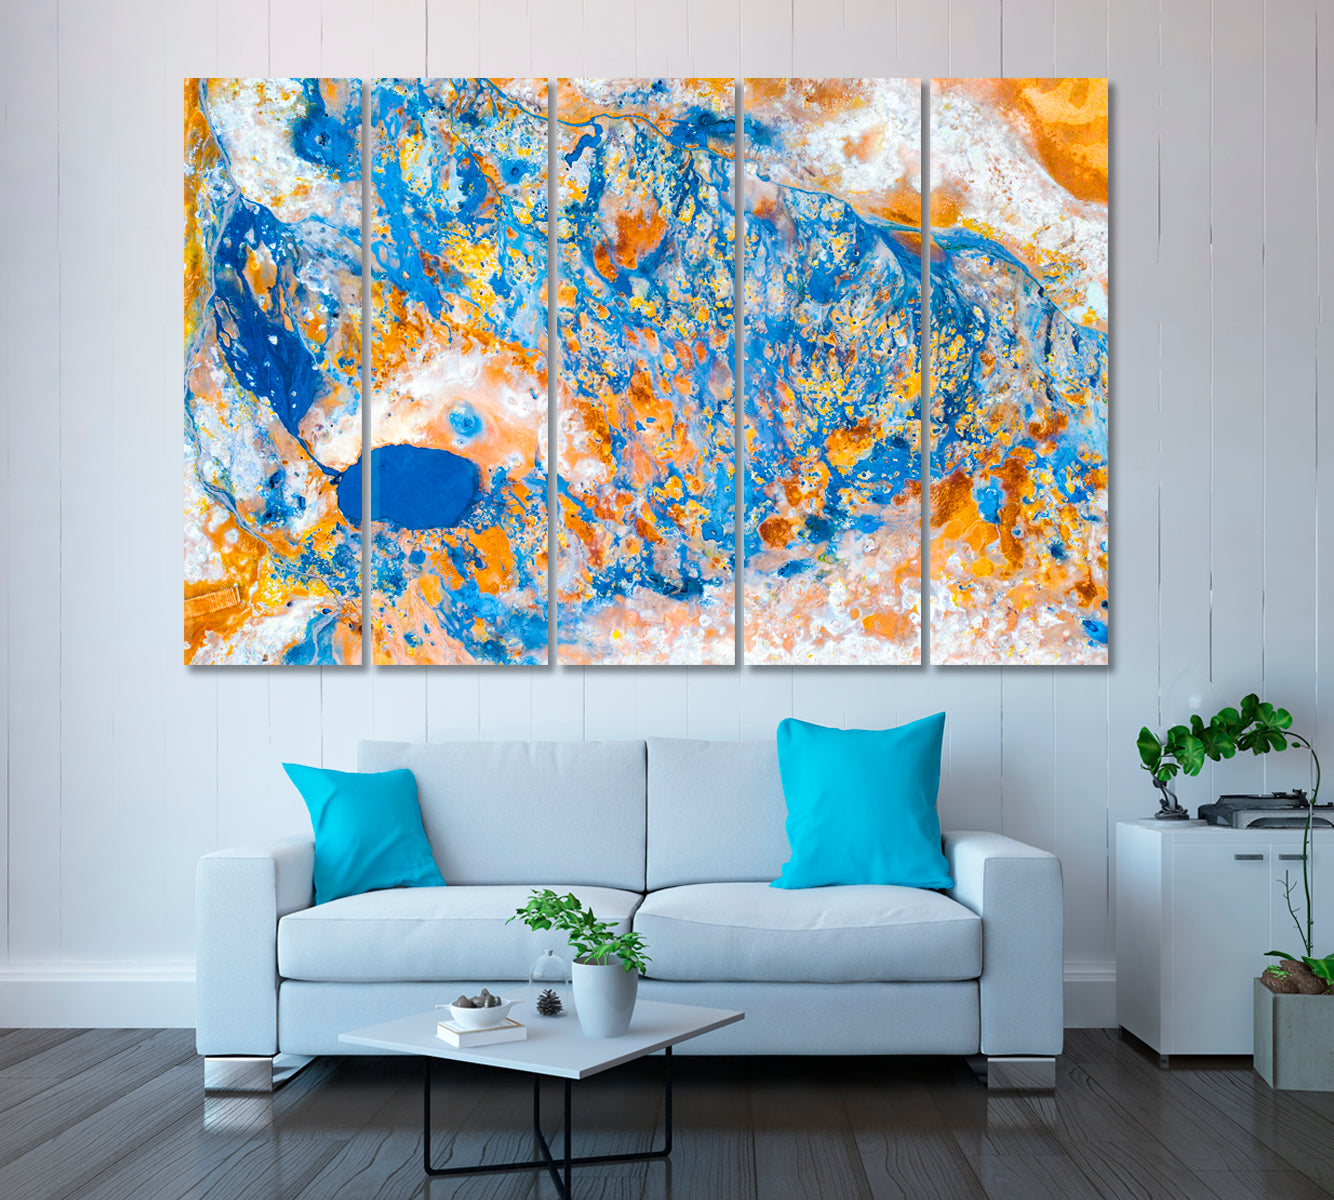 Abstract Volcanic Pattern Canvas Print ArtLexy 5 Panels 36"x24" inches 